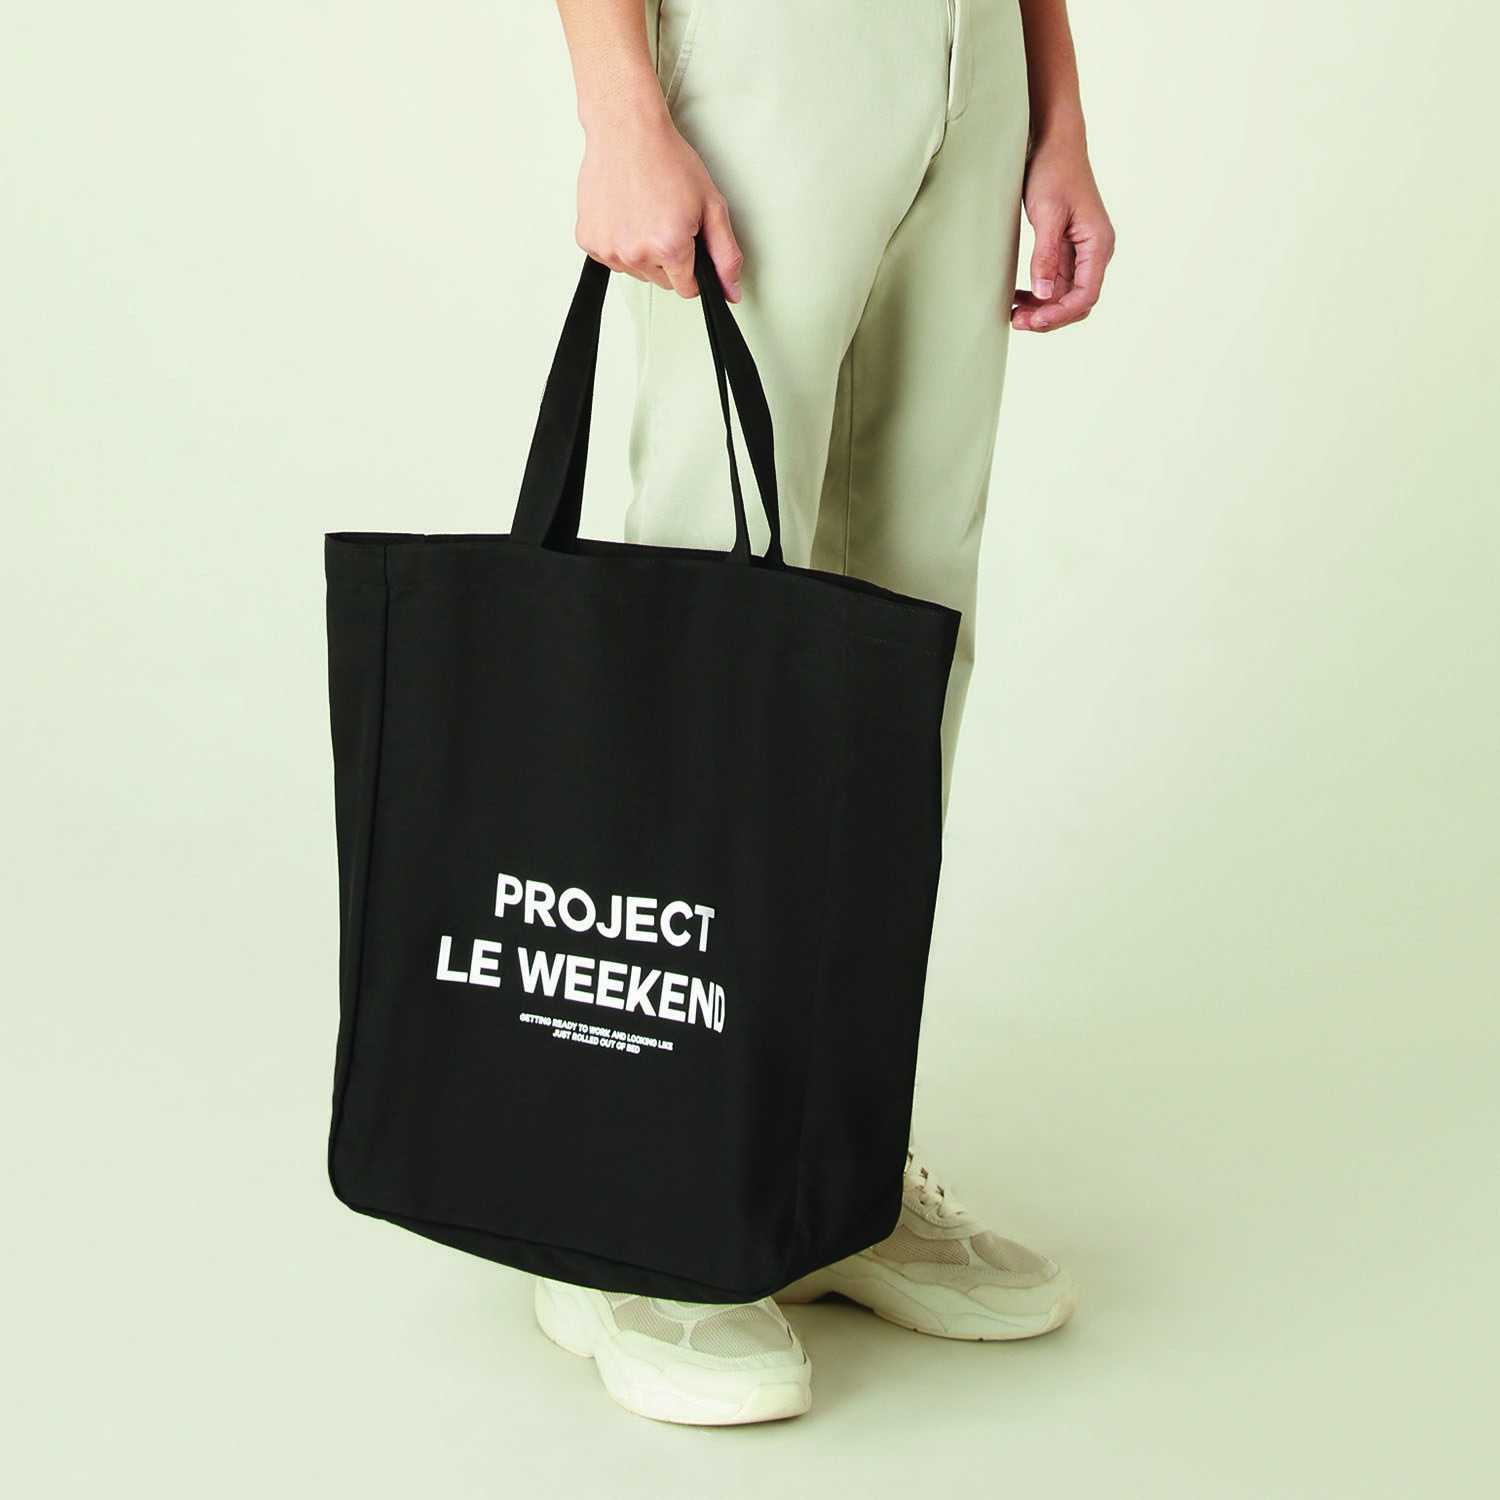 Morgan Homme กระเป๋า Tote Project Le Weekend รุ่น TOMMY สีดำ